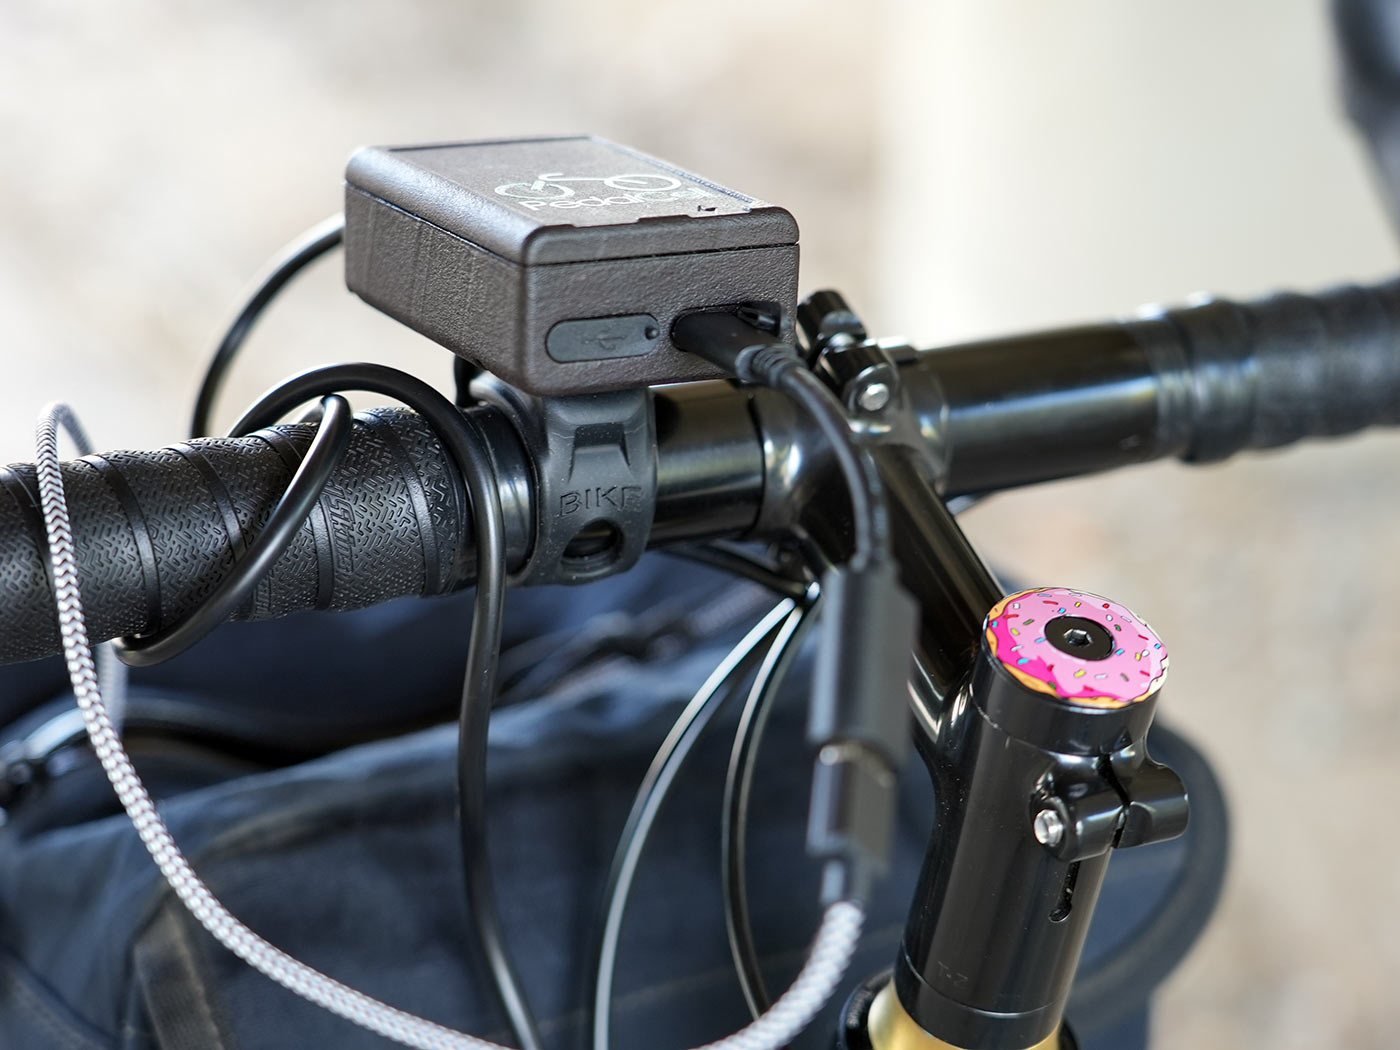 pedalcell bicycle dynamo control box with USB outlets shown on a handlebar